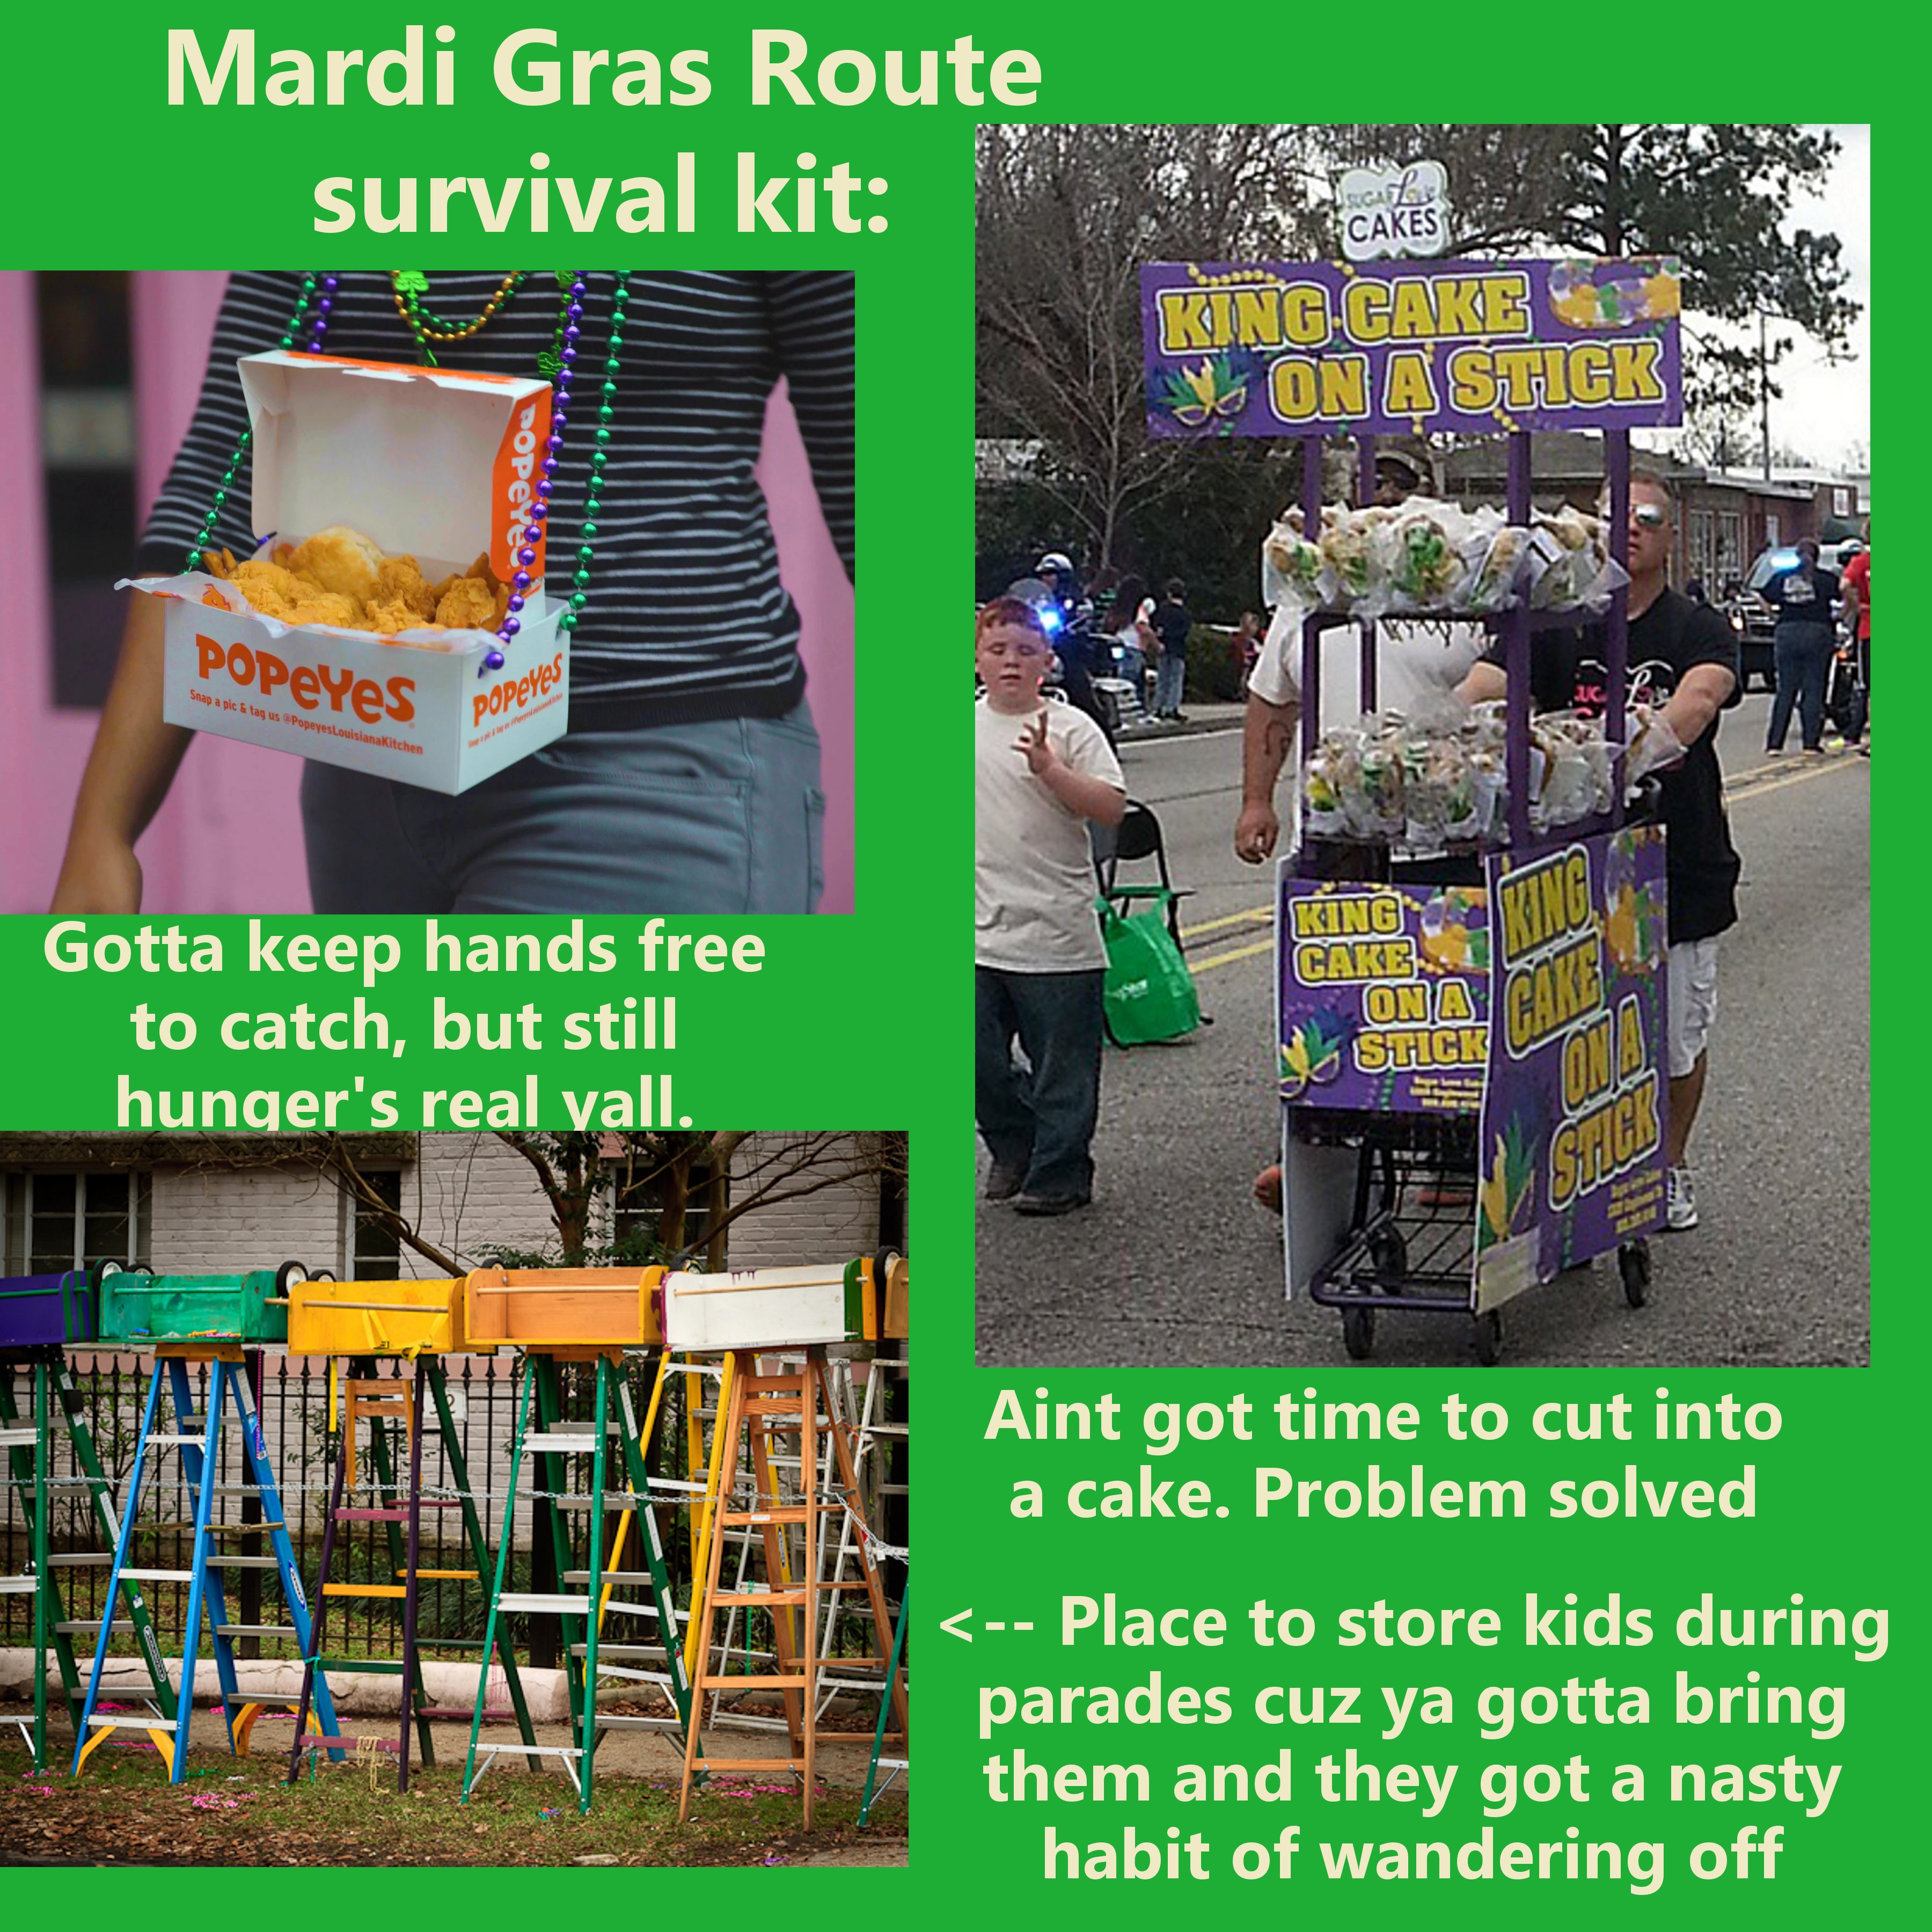 vehicle - Mardi Gras Route survival kit Cakes KingCare On A Stick Popeyes Gotta keep hands free to catch, but still hunger's real vall. King Cakes On Stick Of Aint got time to cut into a cake. Problem solved